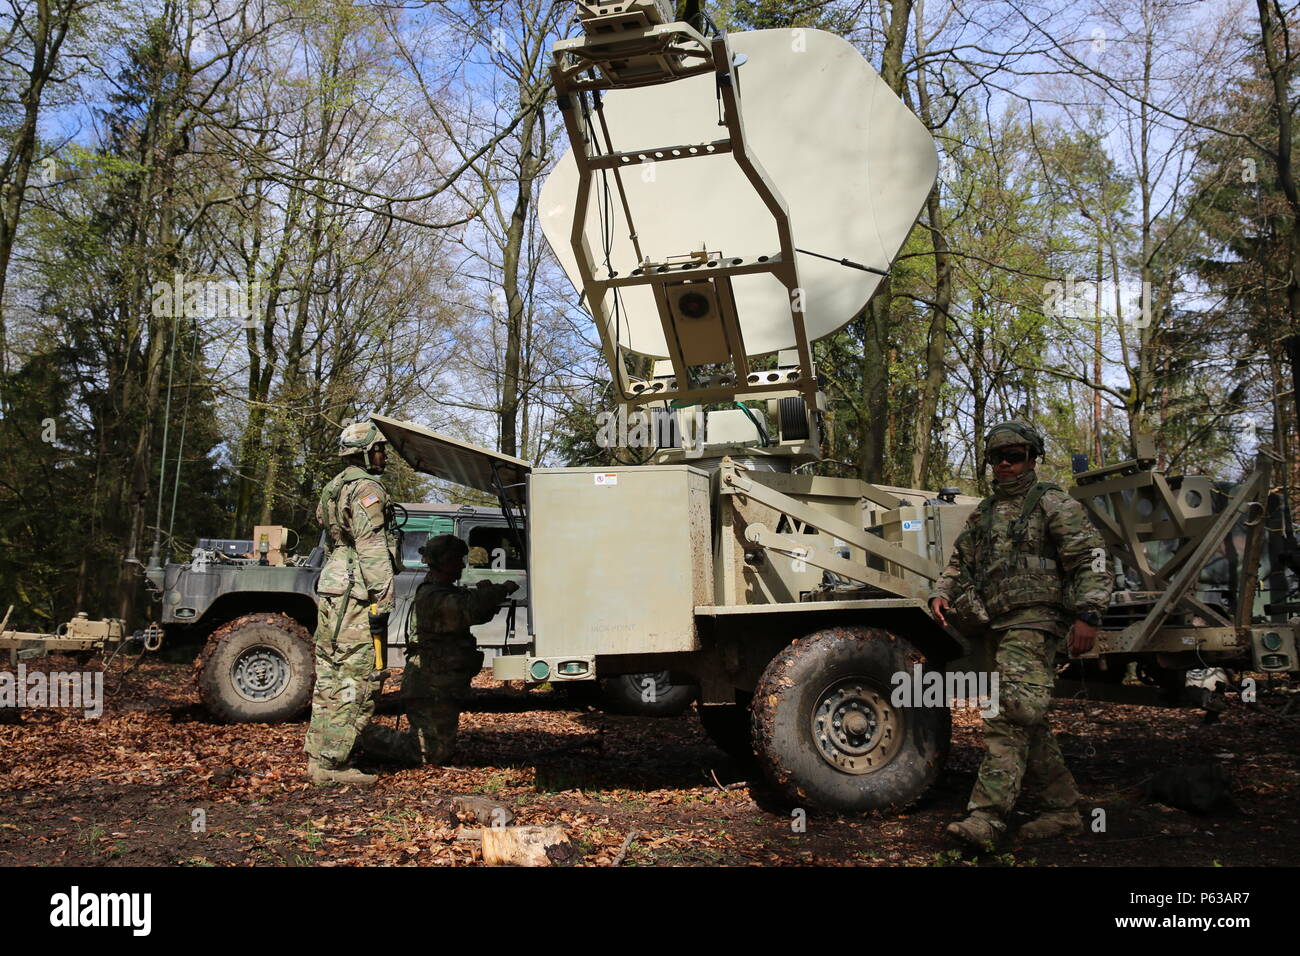 U.S. Soldiers of 1st Squadron, 91st Cavalry Regiment, 173rd Airborne Brigade perform pre-combat checks on a Satellite Transportable Terminal while conducting tactical operations during exercise Saber Junction 16 at the U.S. Army’s Joint Multinational Readiness Center (JMRC) in Hohenfels, Germany, April 16, 2016. Saber Junction 16 is the U.S. Army Europe’s 173rd Airborne Brigade’s combat training center certification exercise, taking place at the JMRC in Hohenfels, Germany, Mar. 31-Apr. 24, 2016.  The exercise is designed to evaluate the readiness of the Army’s Europe-based combat brigades to c Stock Photo